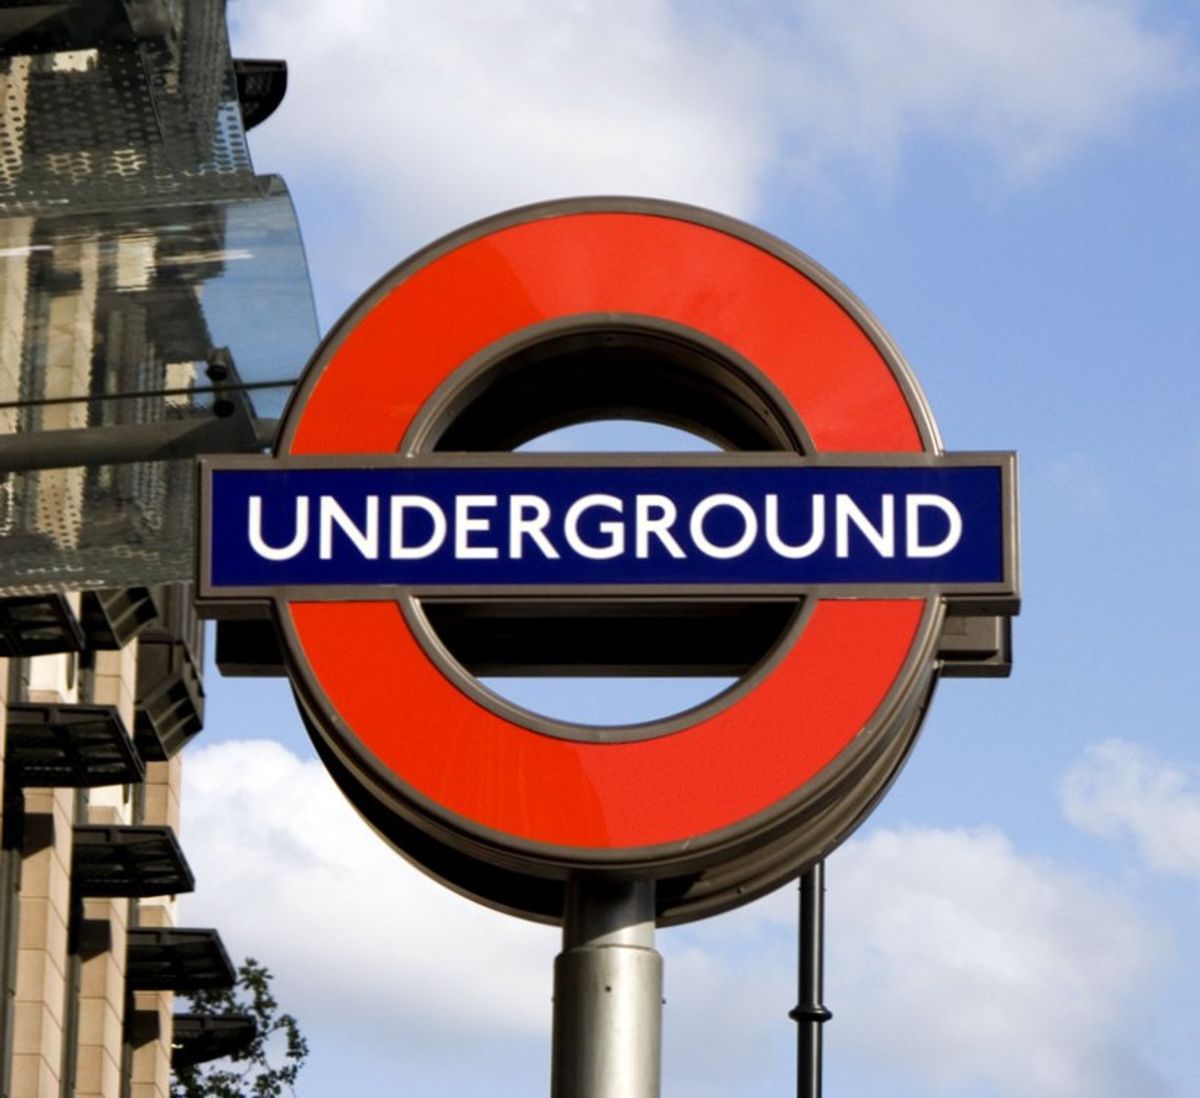 A Beginner's Guide To Riding The Tube